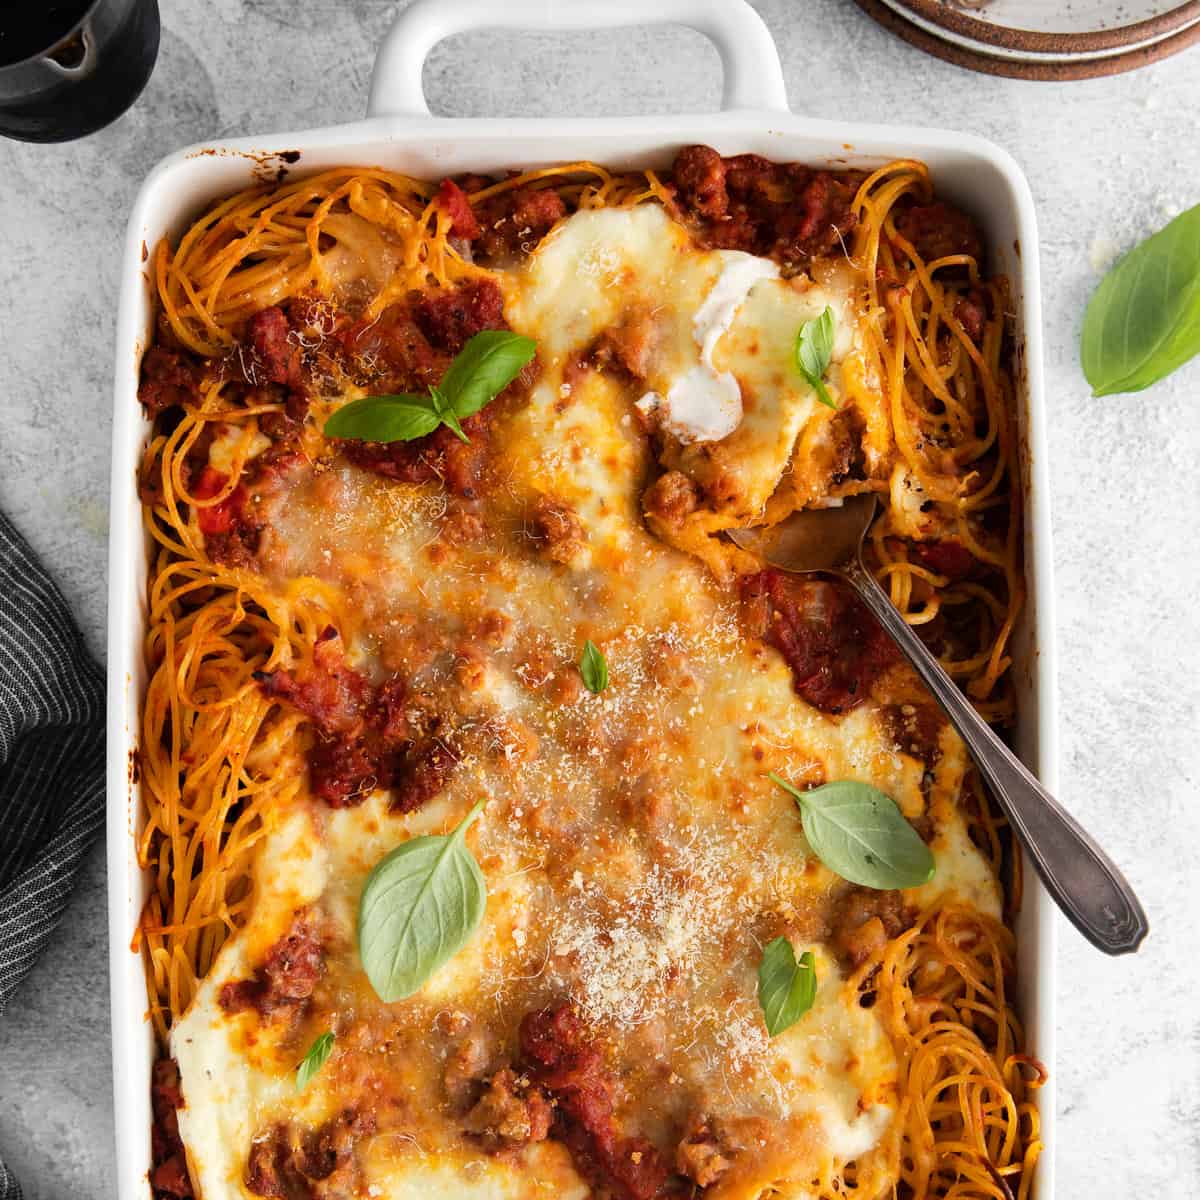 Baked Spaghetti with Cream Cheese - The Cheese Knees